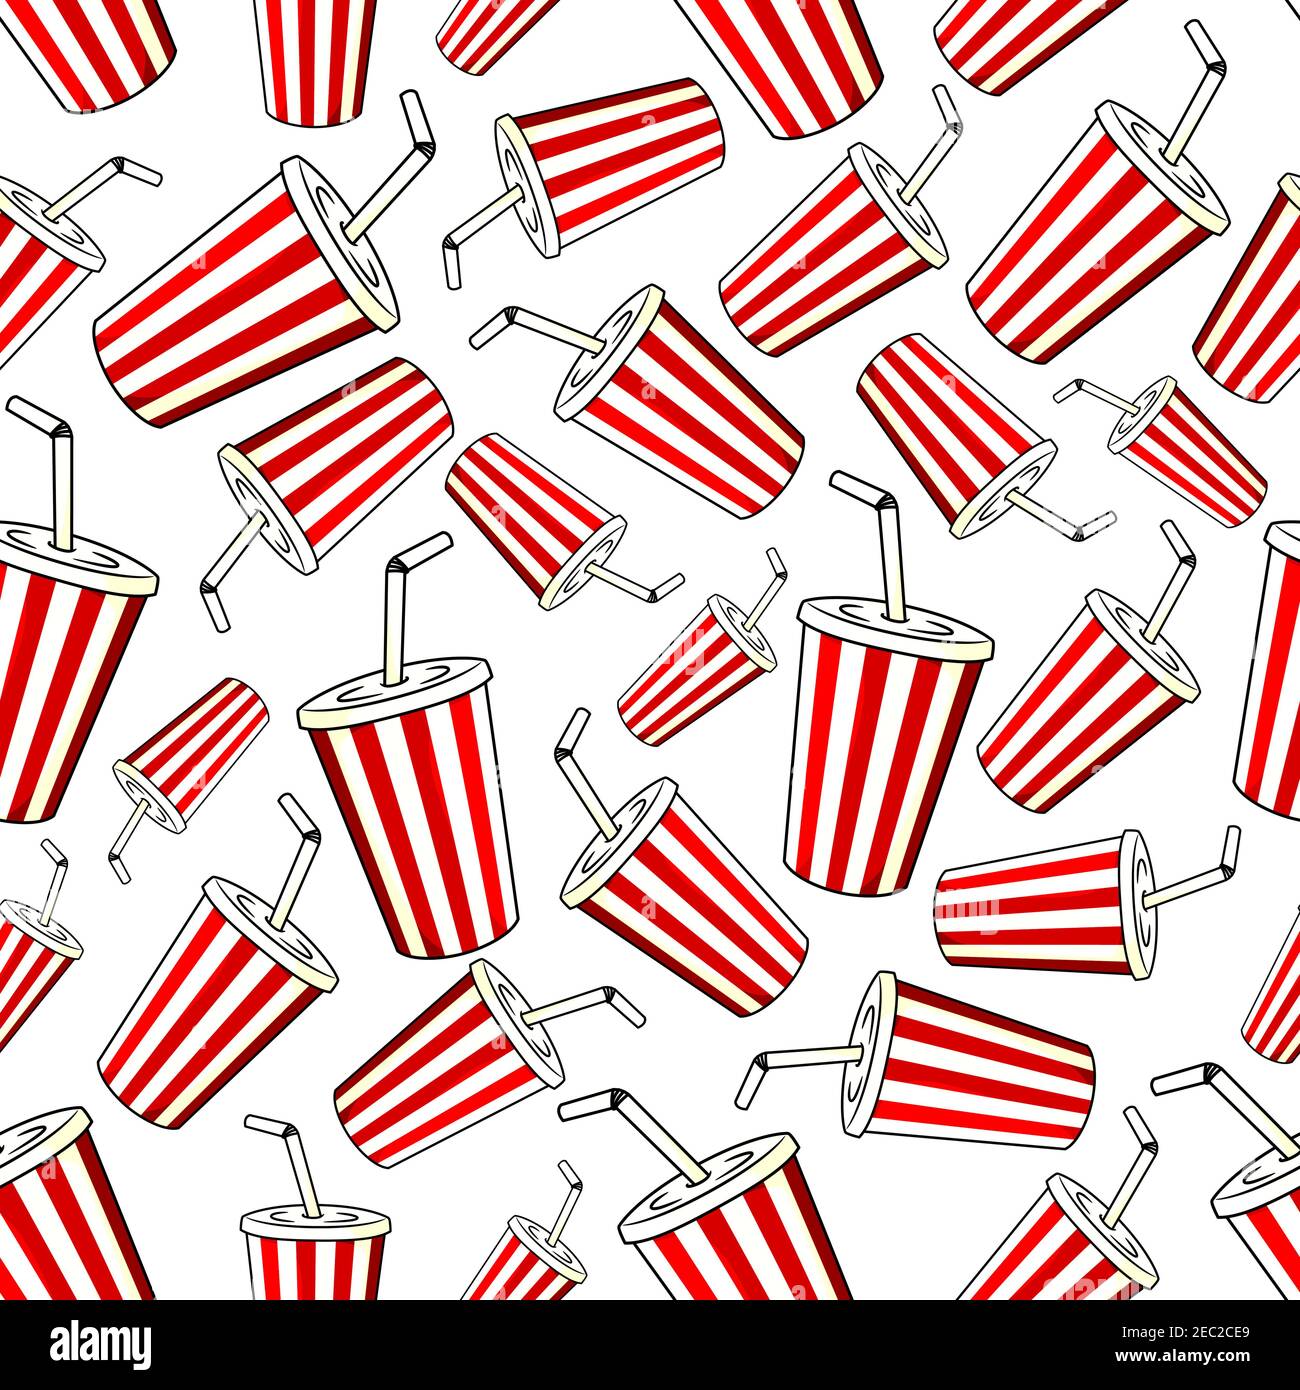 Takeaway soft drinks background with seamless pattern of red and white striped paper cups of sweet soda with caps and drinking straws. Fast food, cafe Stock Vector